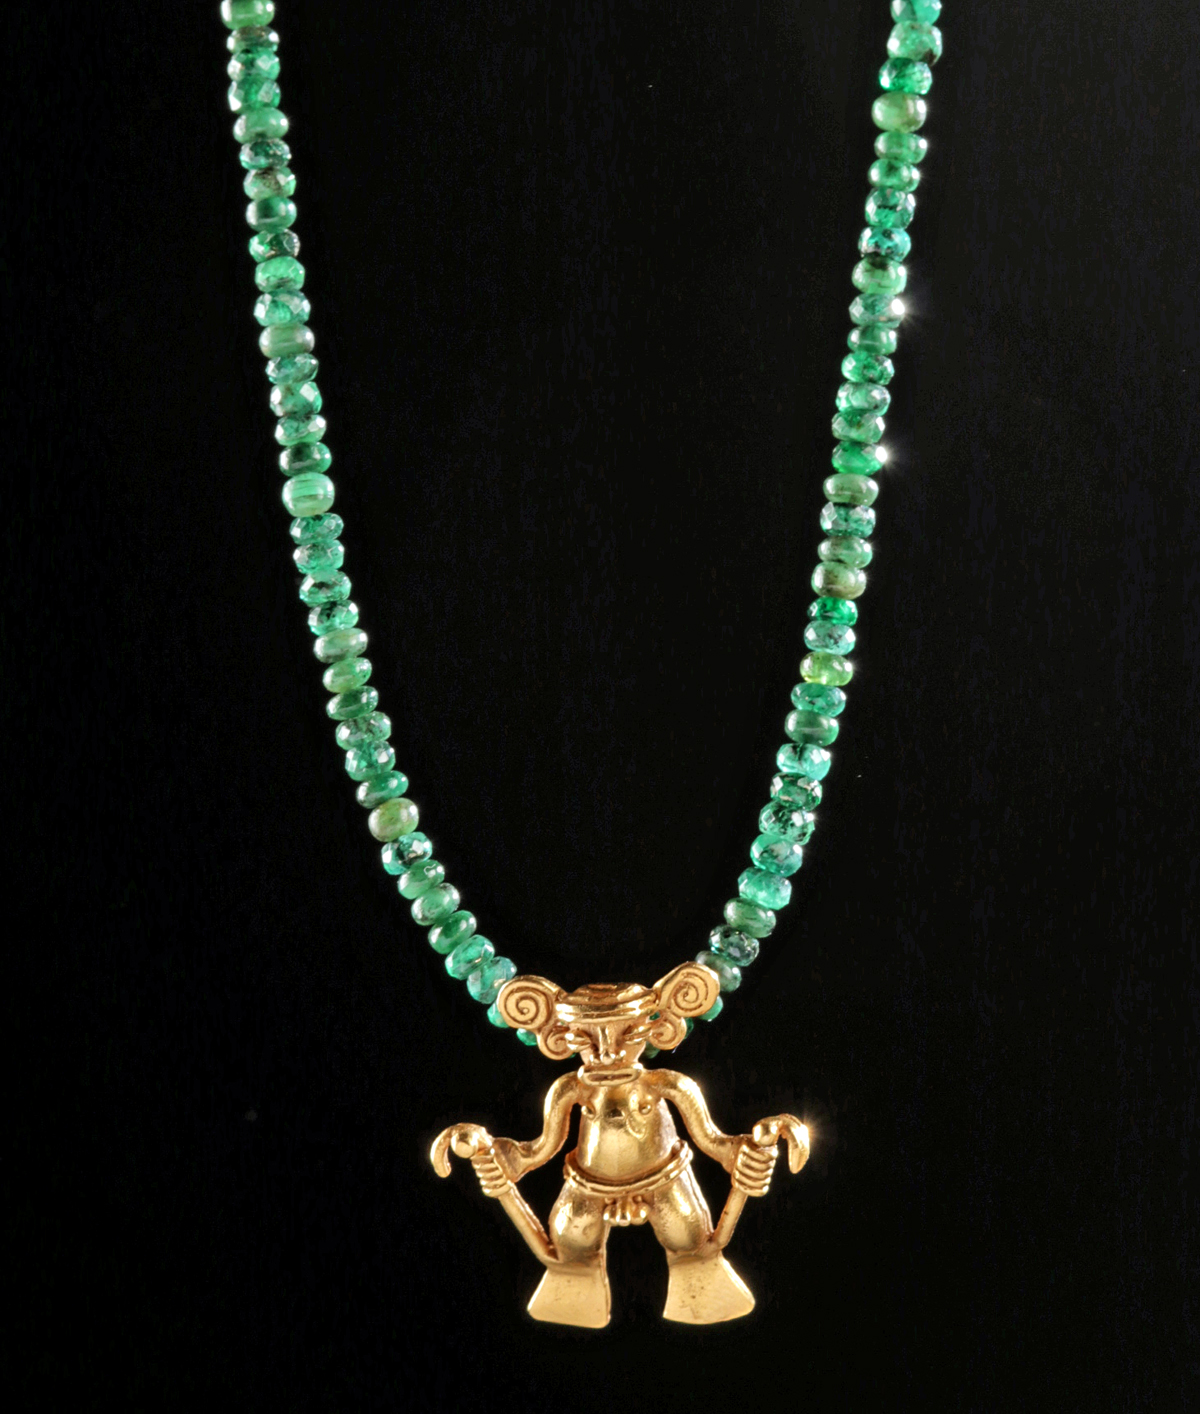 Necklace w/ Ancient Panamanian Gold Amulet & Emeralds - Image 3 of 5